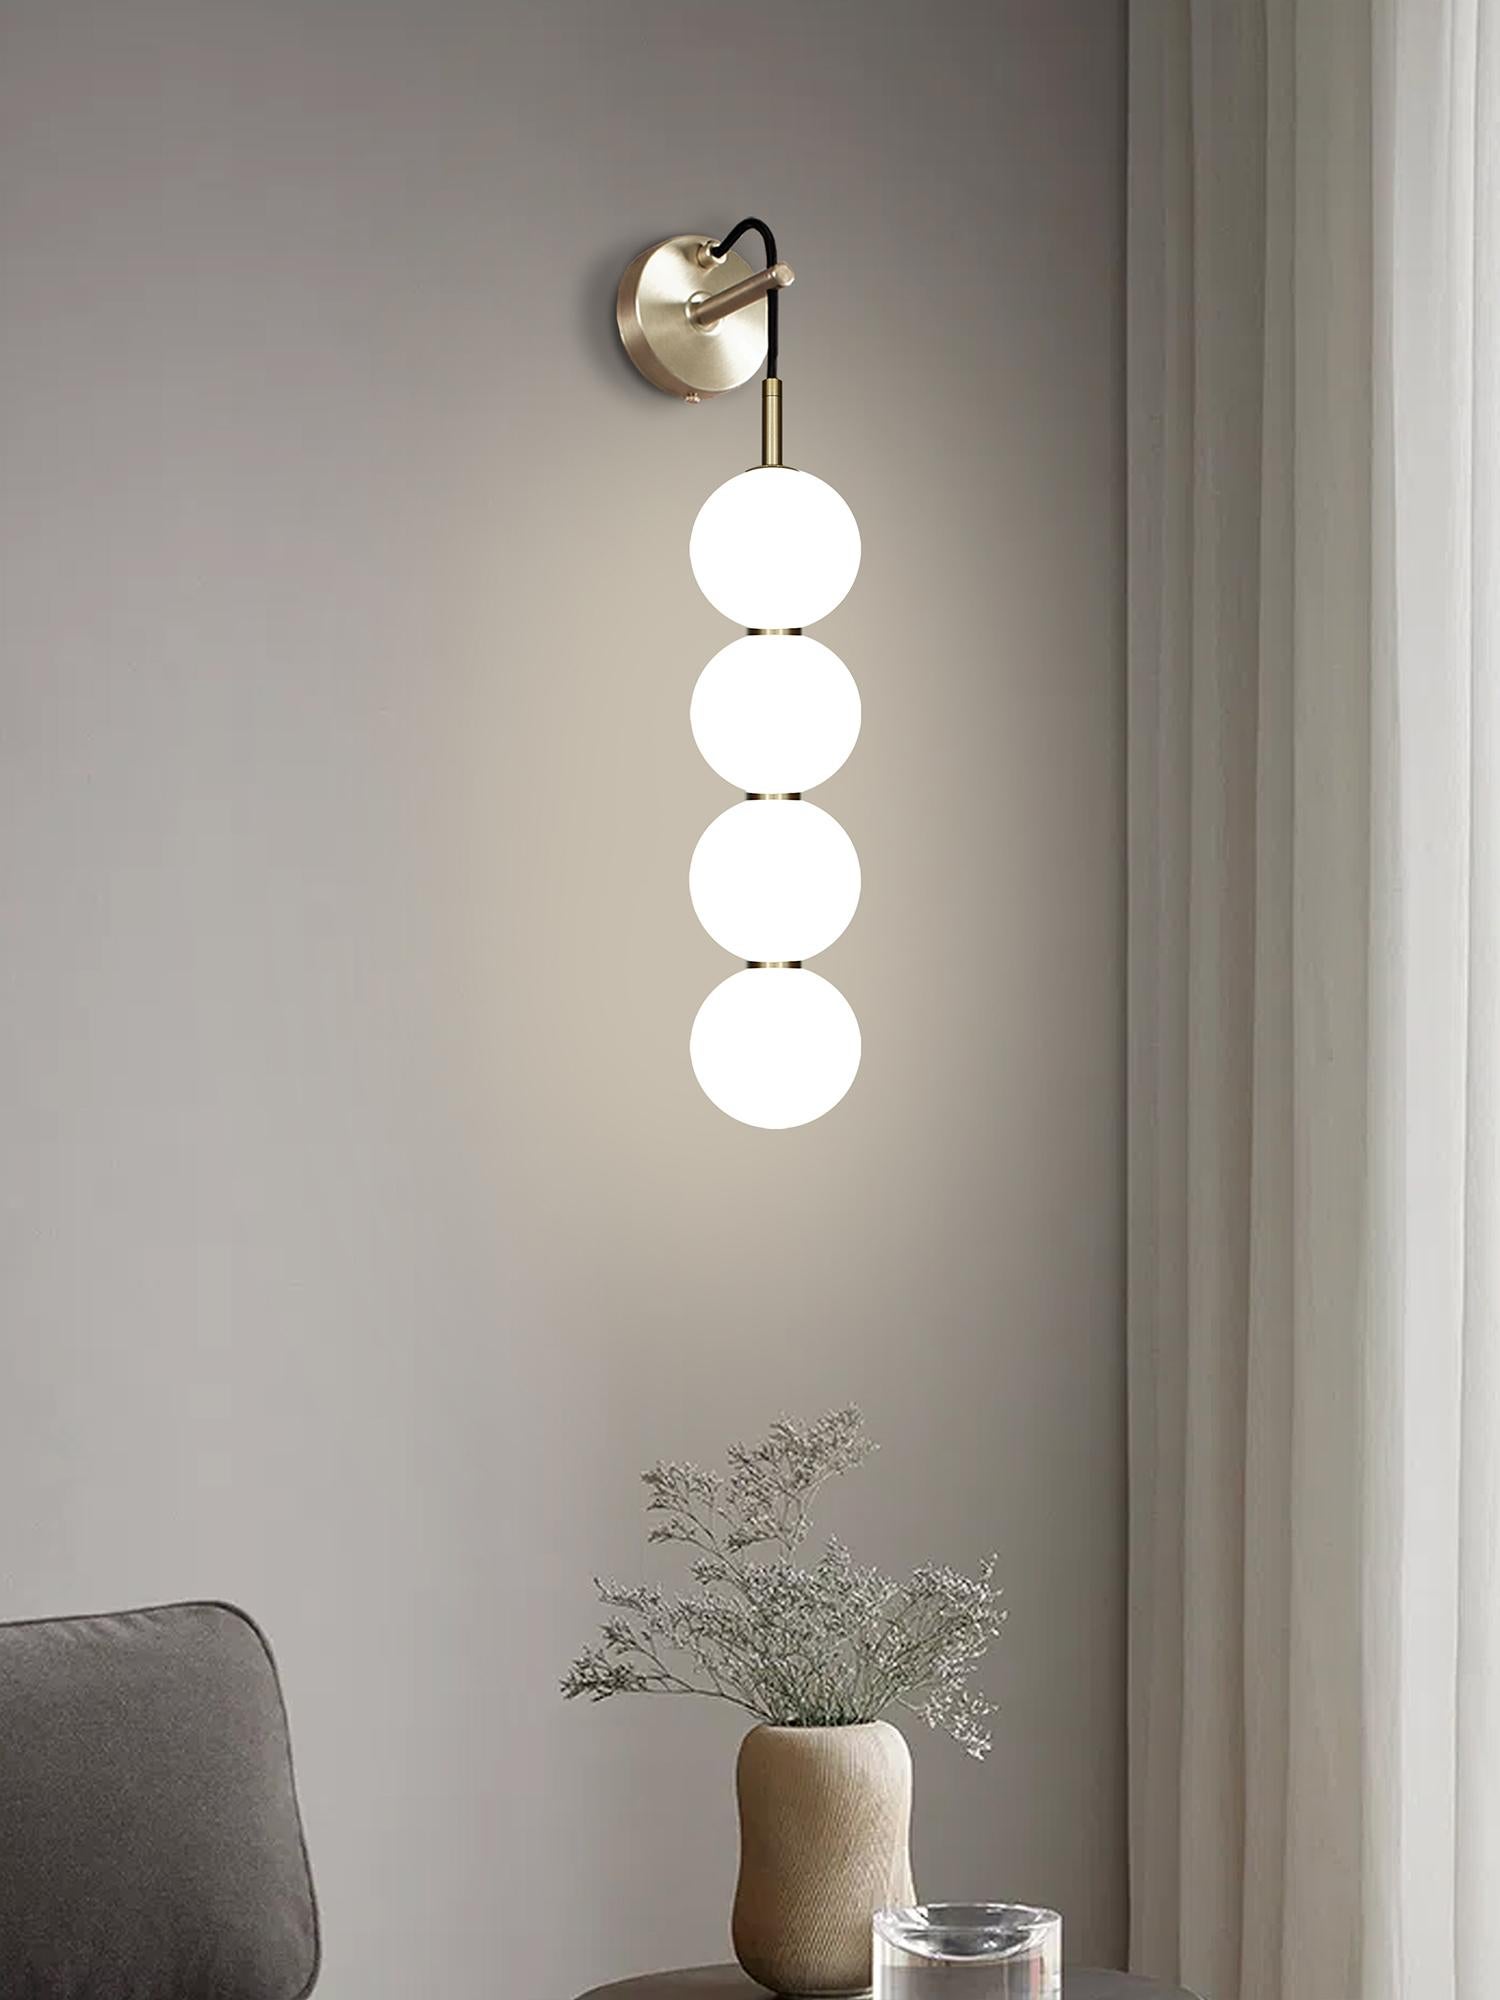 Delicate white opaline glass orbs stacked on top of one another to create an echoed glow of light and the illusion of subtle reflections.